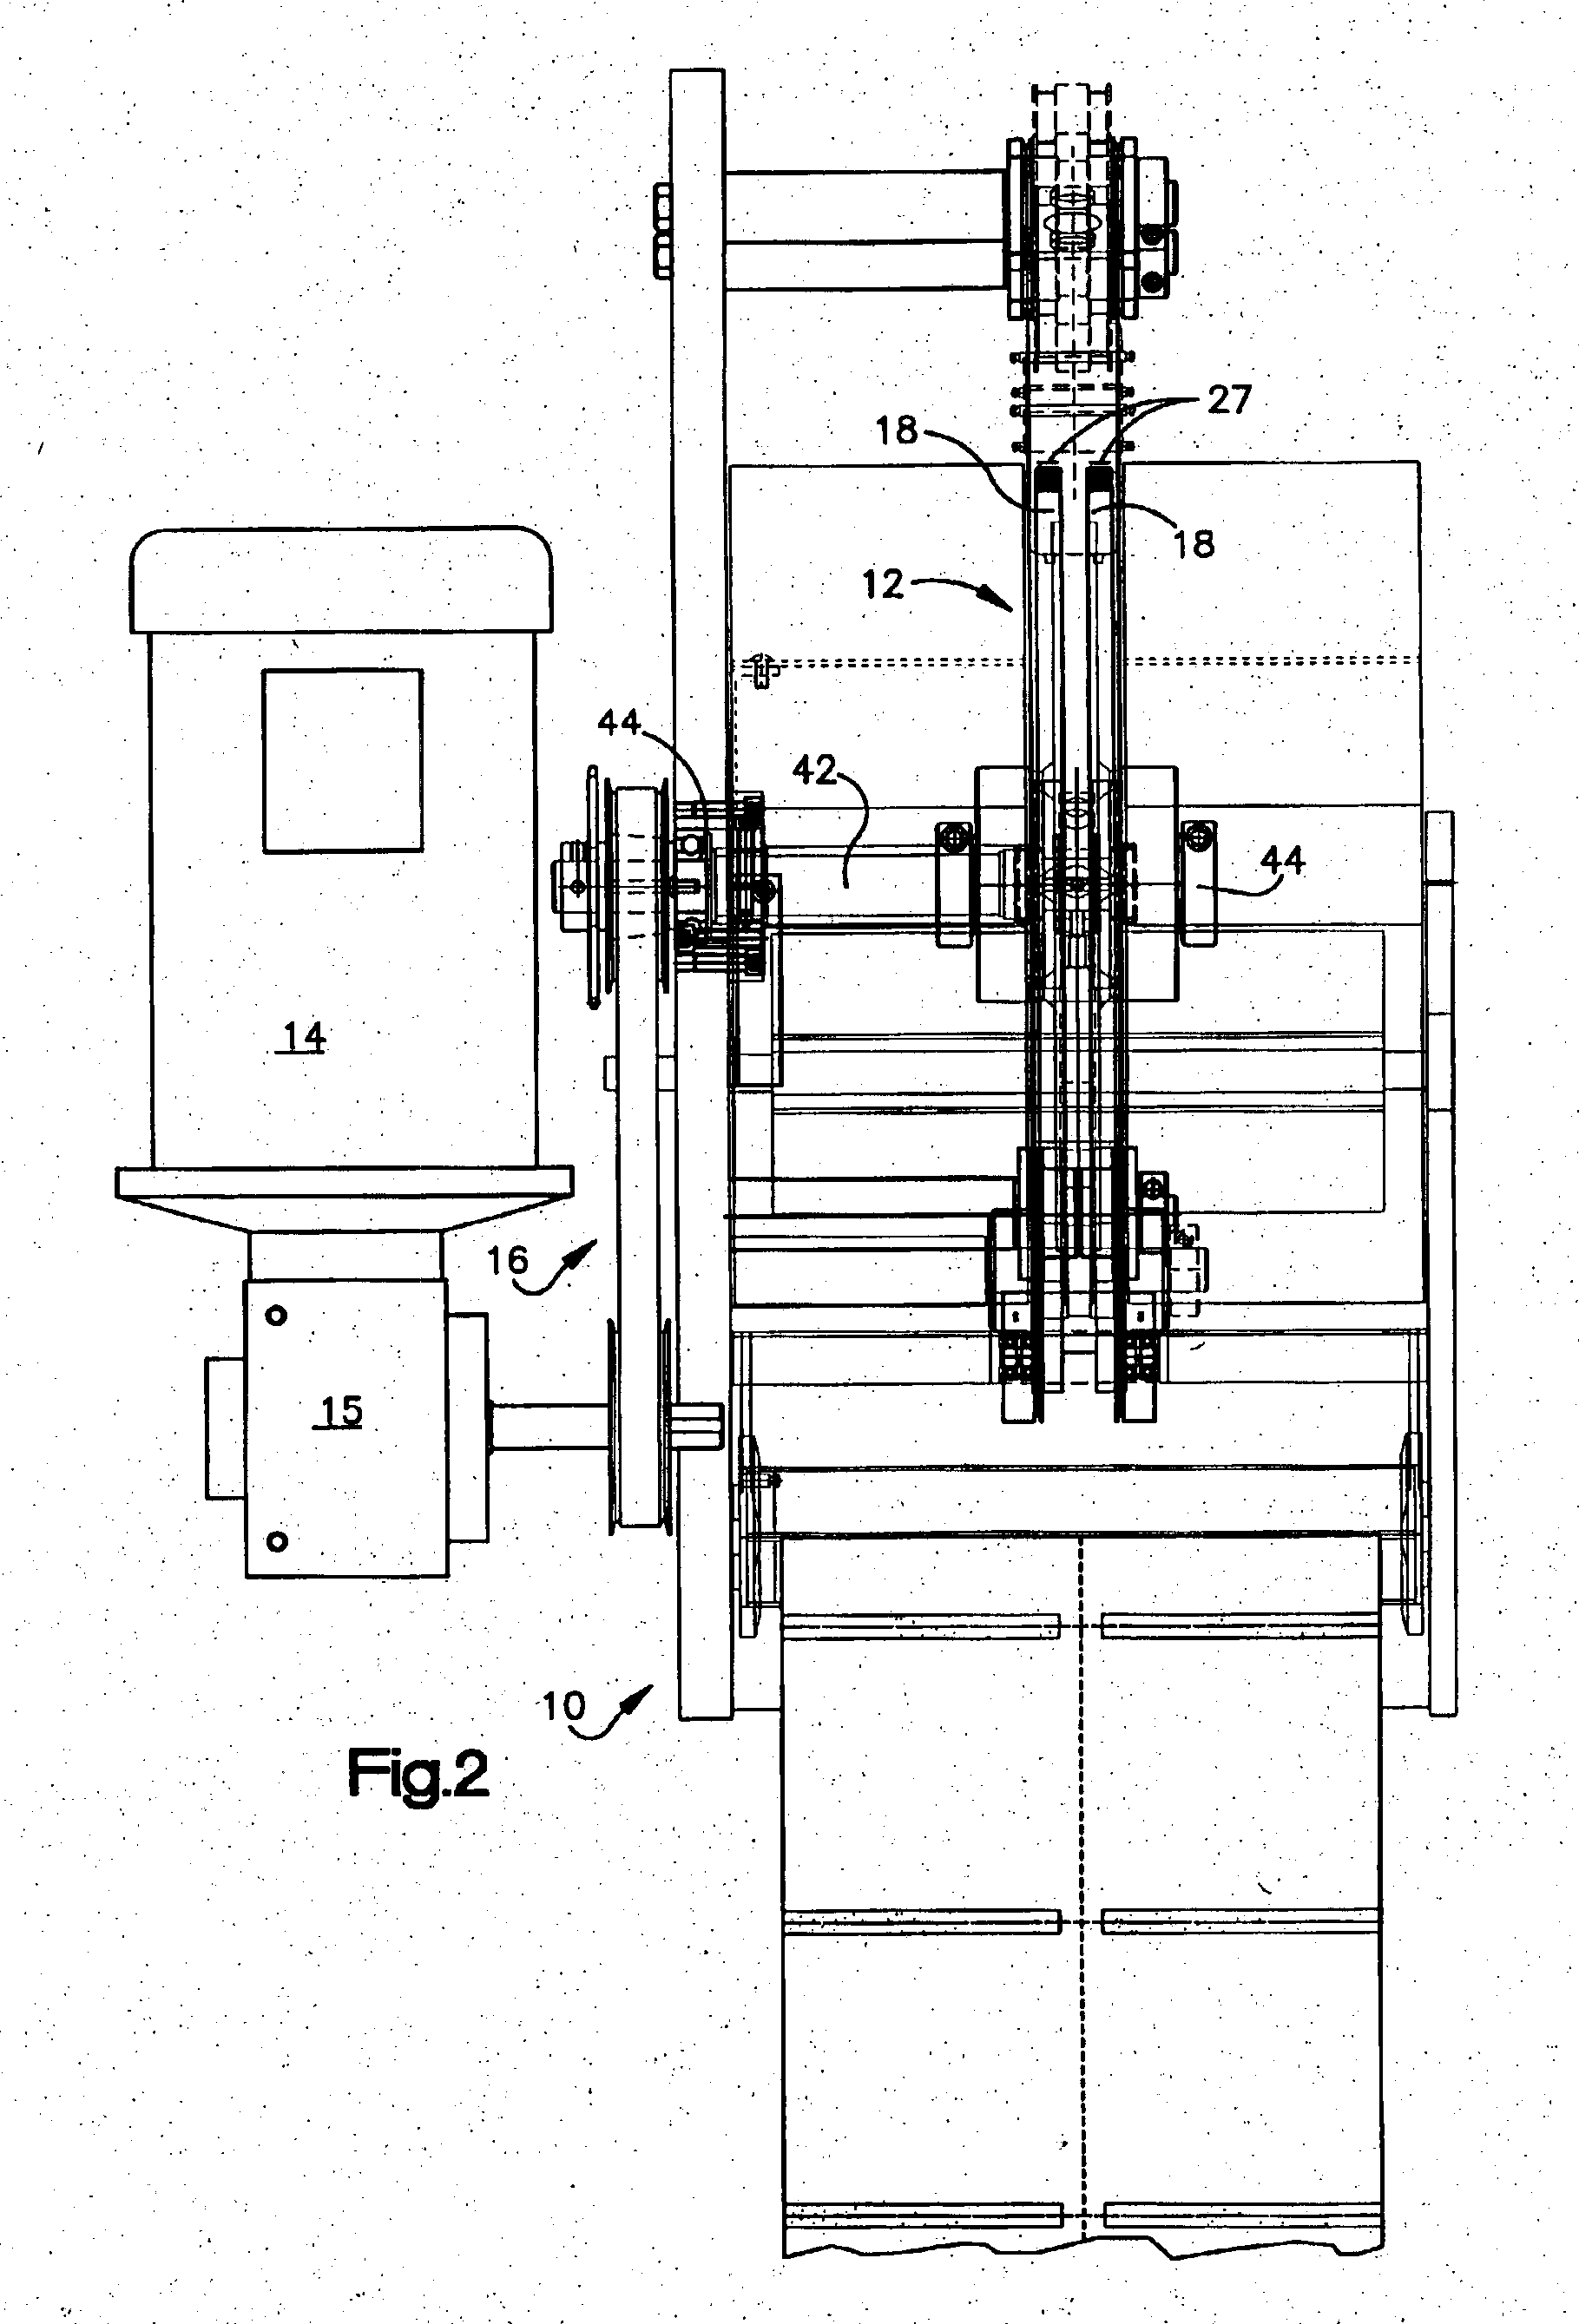 Fluid filled unit formation machine and process